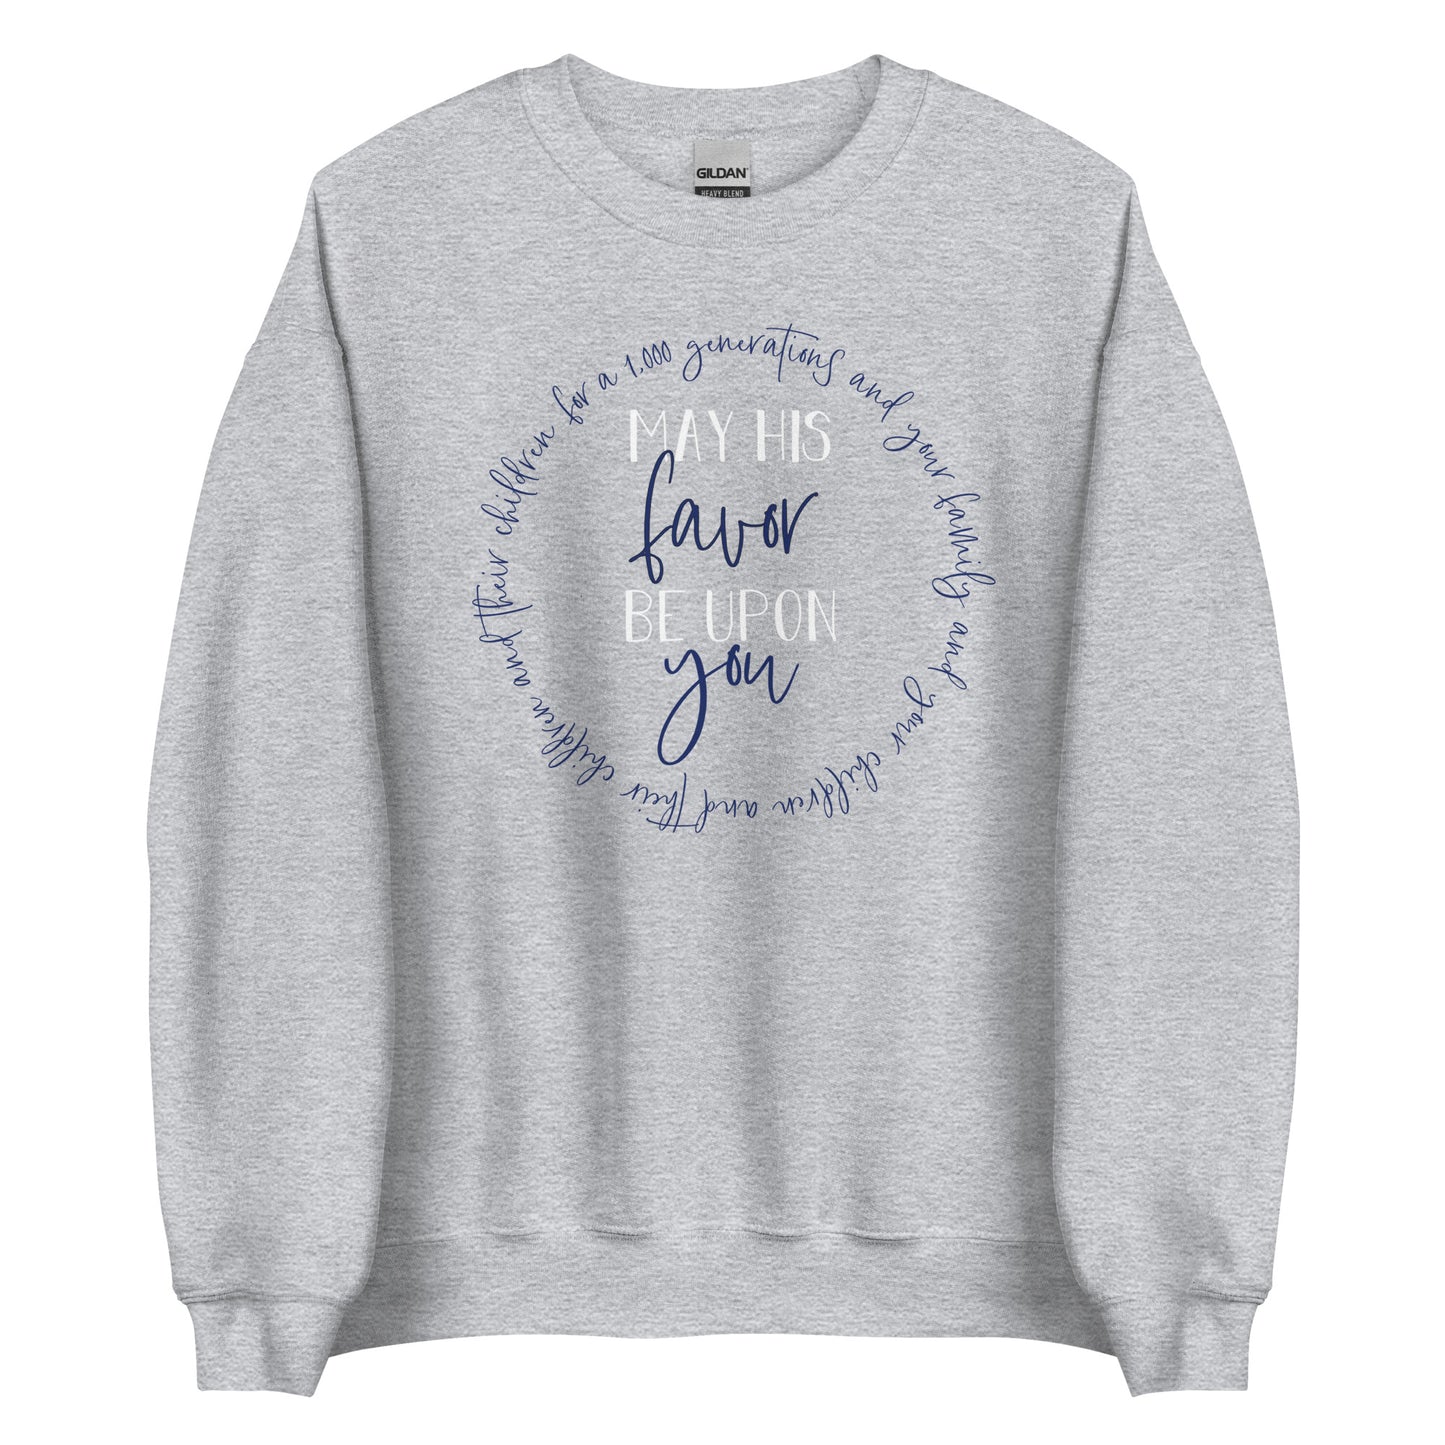 May His Favor Be Upon You family & children Numbers 6 The Blessing Christian aesthetic circle design printed on cozy heather sport gray unisex crewneck shirt for women